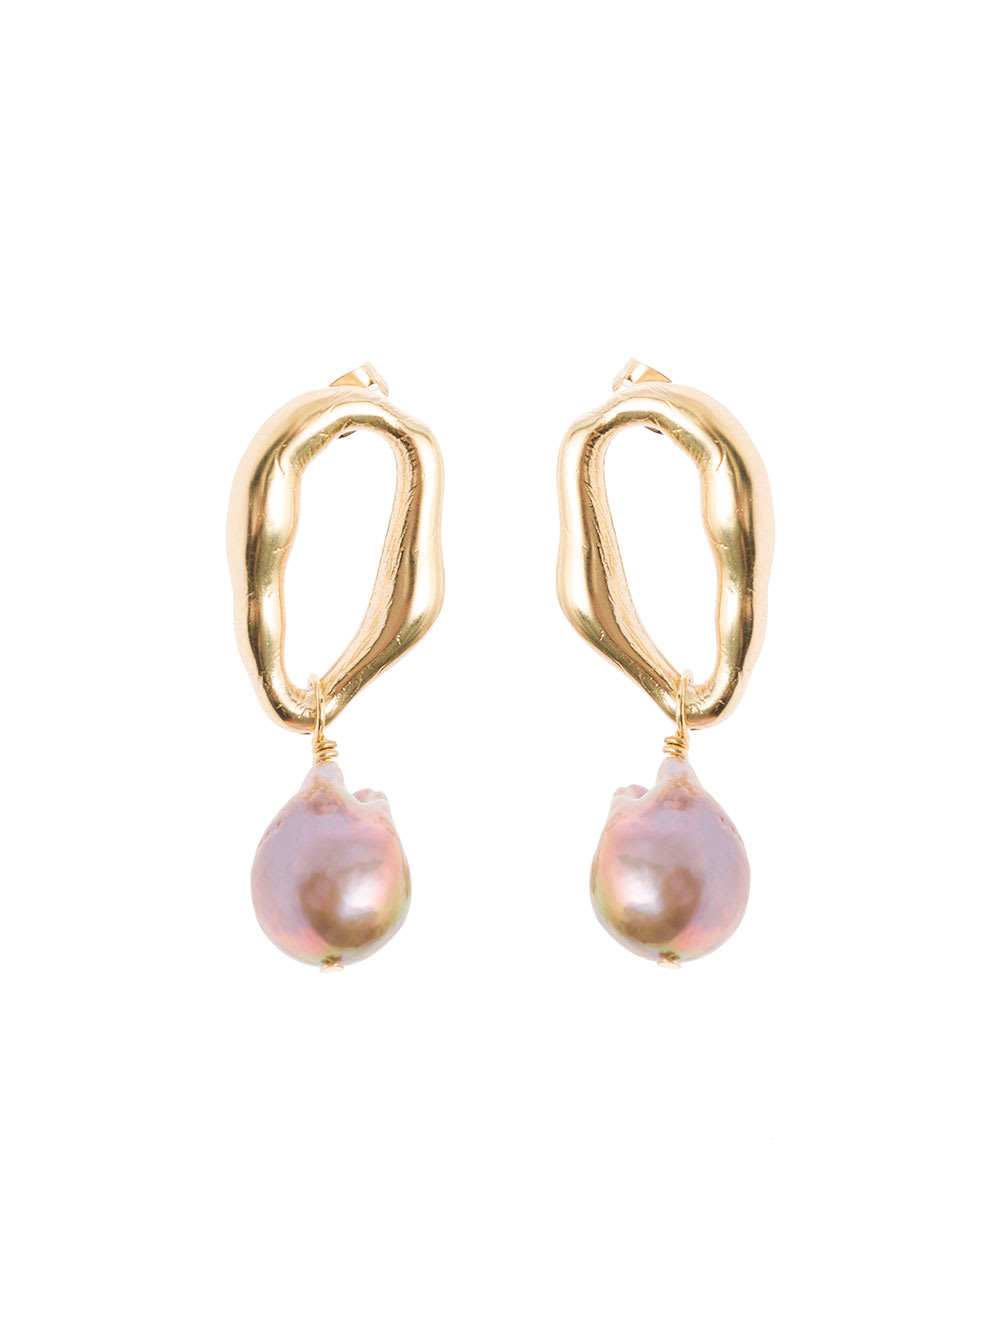 FORTE FORTE GOLD-TONE SCULPTURE EARRINGS WITH FRESH-WATER PEARL PENDANT IN BRONZE WOMAN